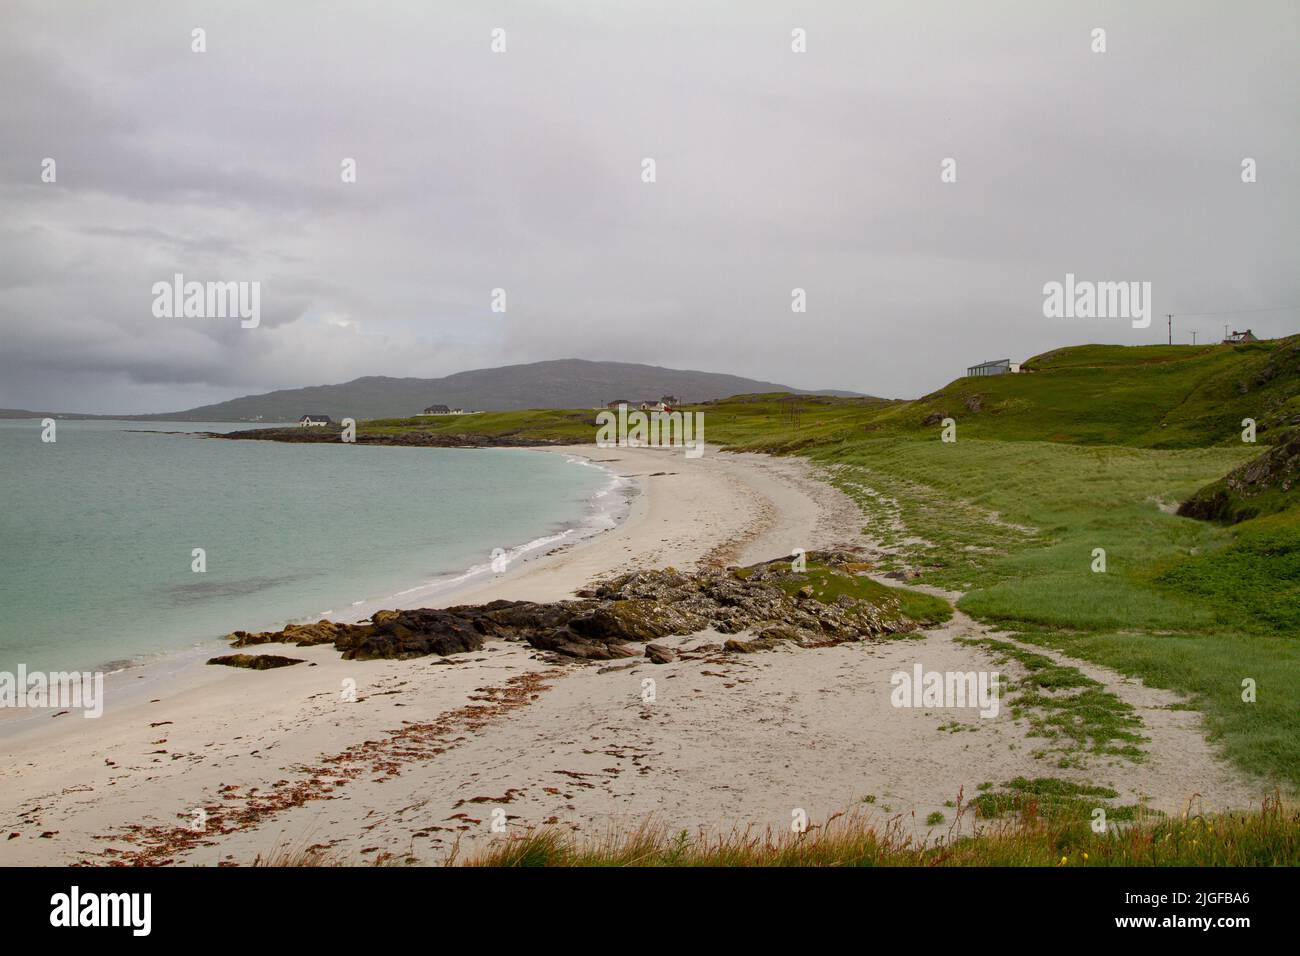 Prince's Bay or Prince Charles Beach (Coilleag a'Phrionnsa), Eriskay, Outer Hebrides Stock Photo